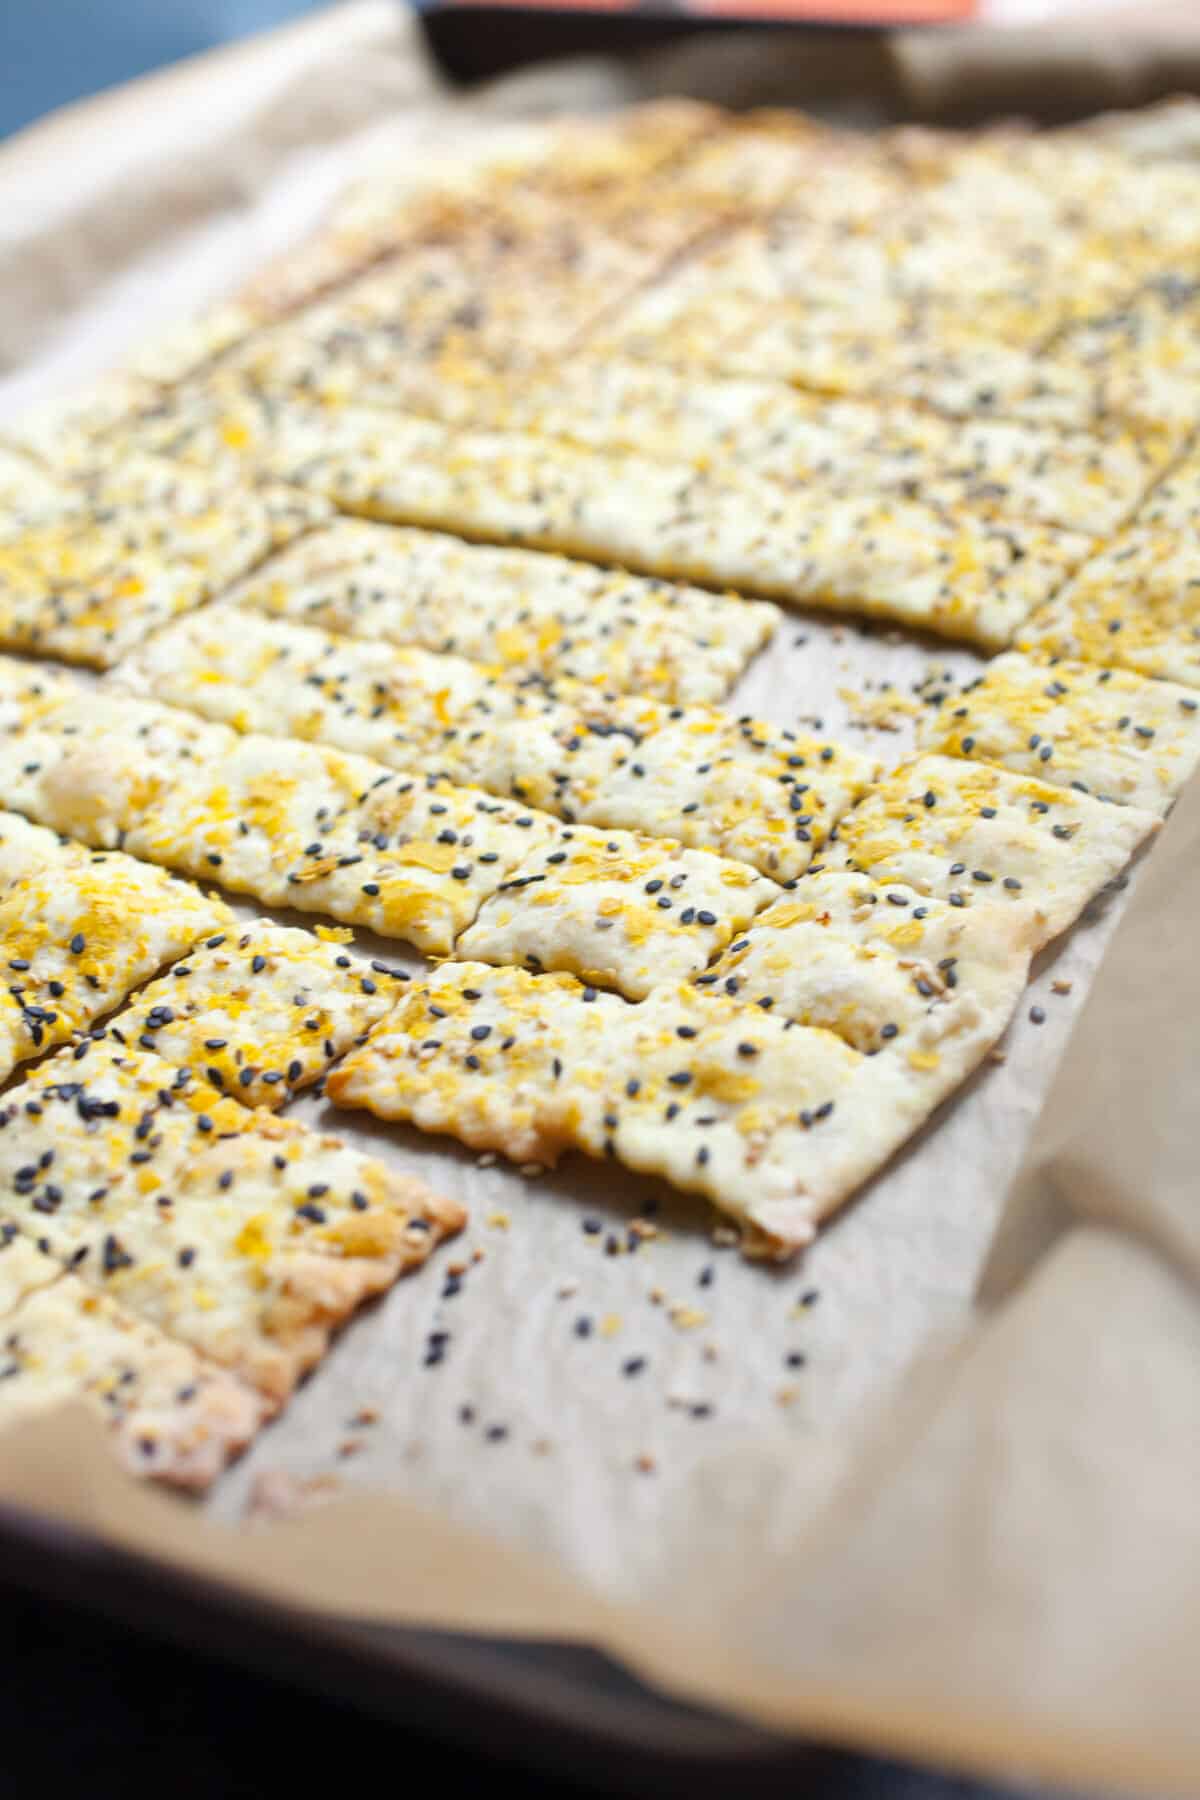 Can't-Stop Crackers: These nutritional yeast crackers are savory, crispy, and SO addictive. Make a double batch because they going to go fast. As in, once you start eating them, you won't stop! | macheesmo.com